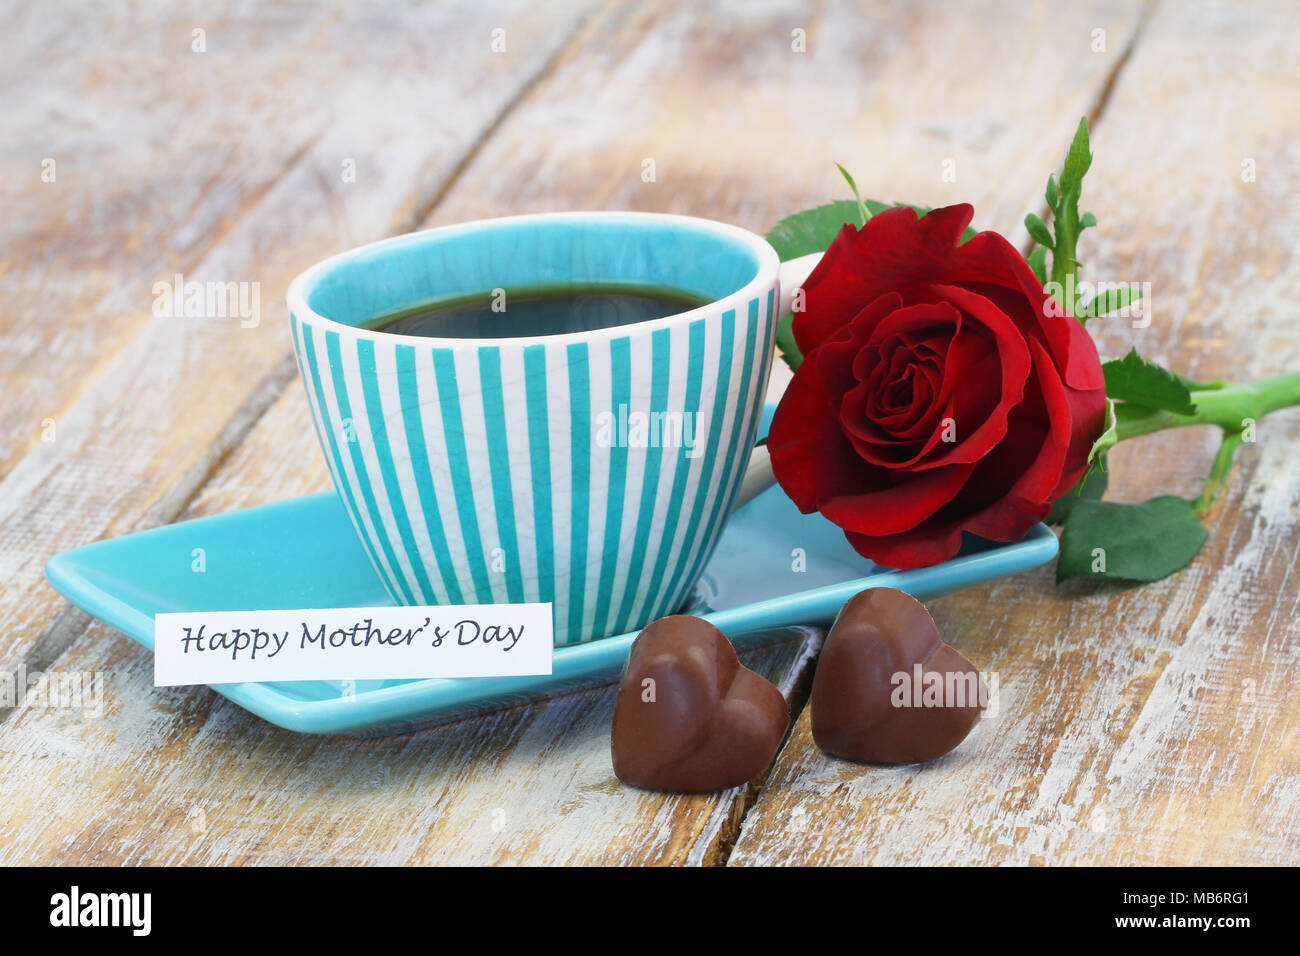 Happy Mothers Day Card With Cup Of Coffee Red Rose And Two